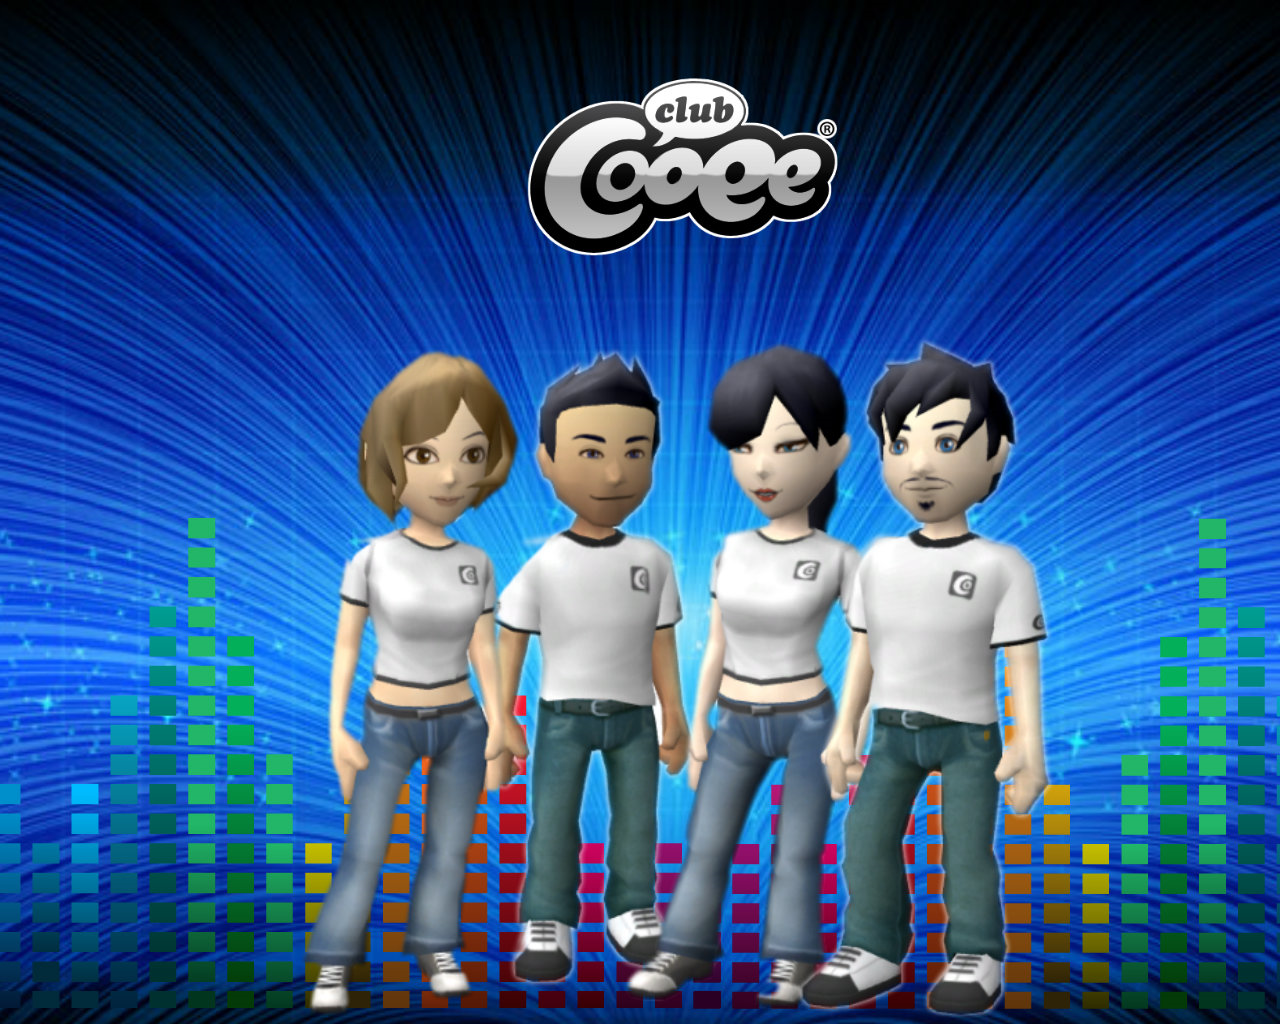 Club Cooee Store - Fan Gear, Guides, Gift Certificates and More.